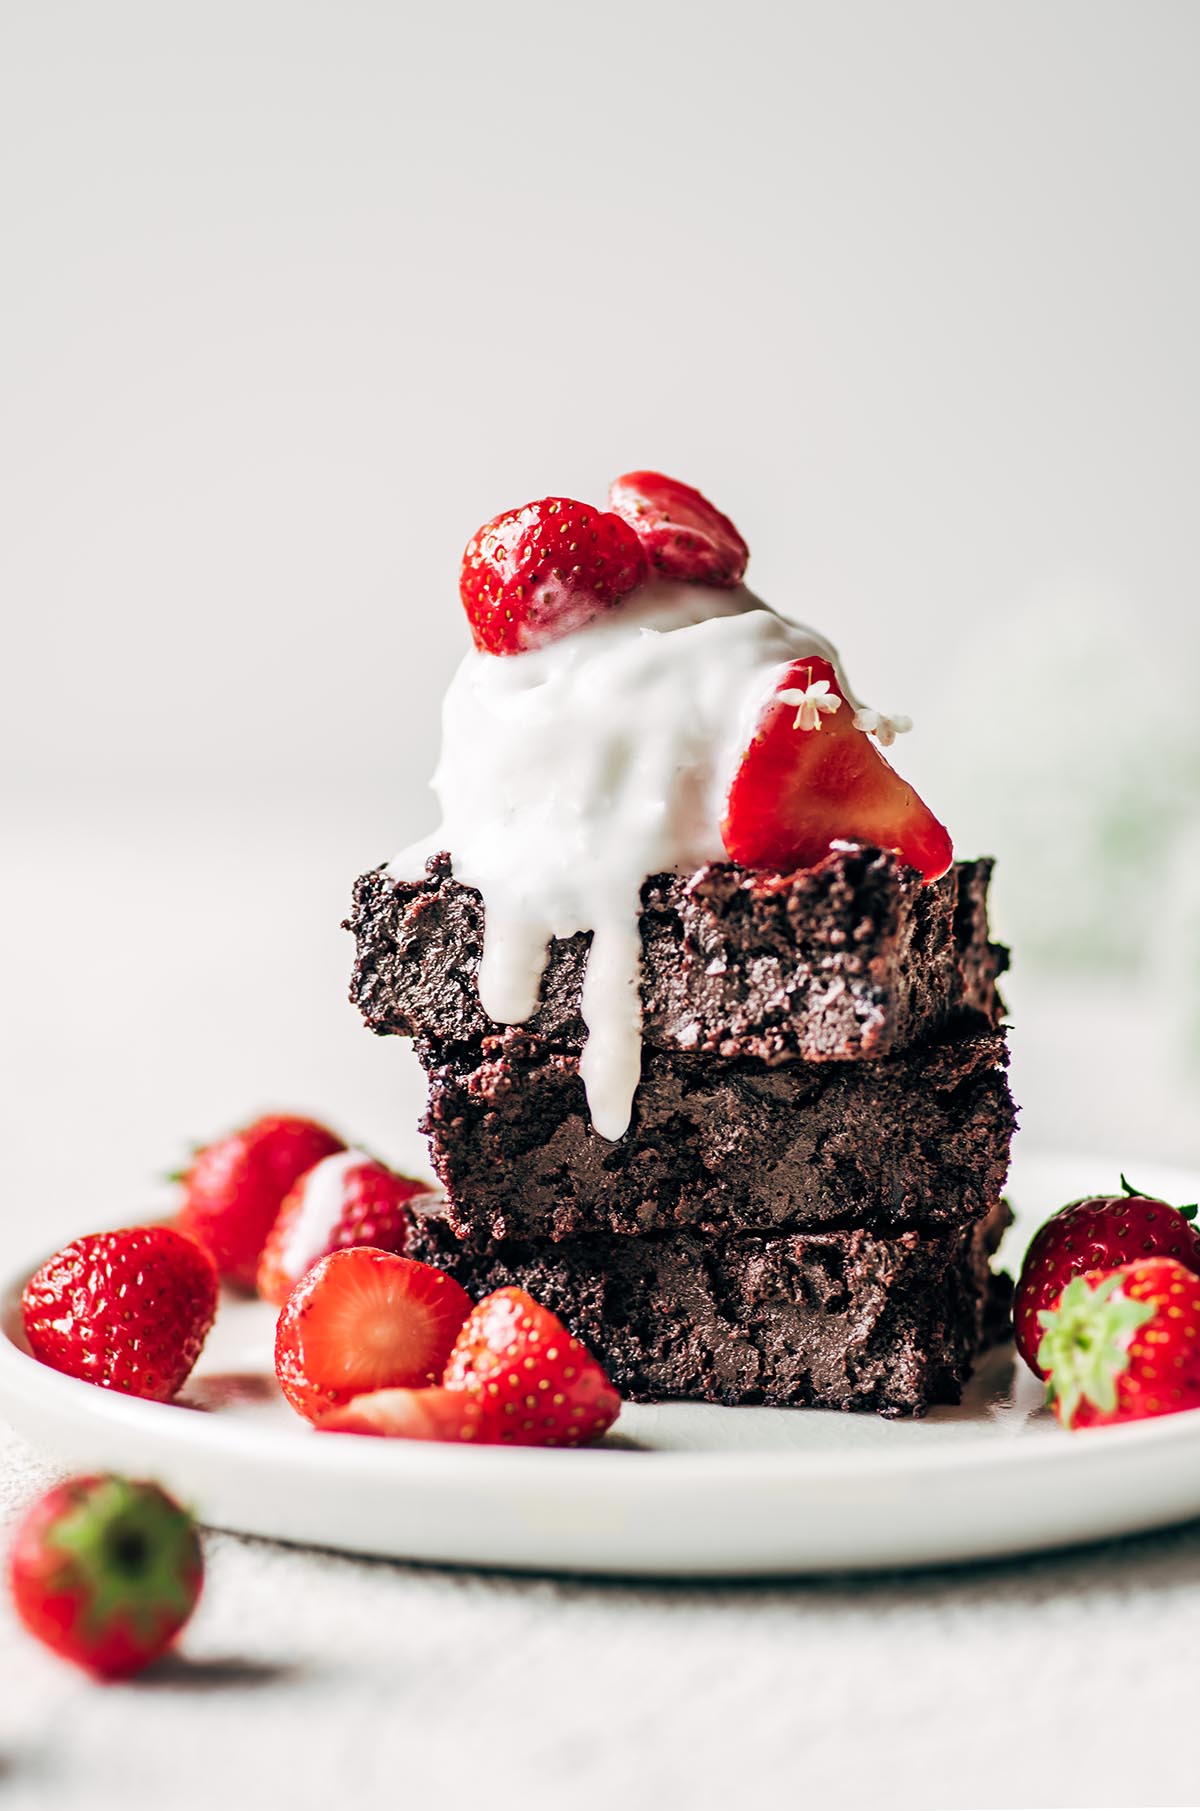 Three brownies stacked on a plate with ice cream and strawberries.